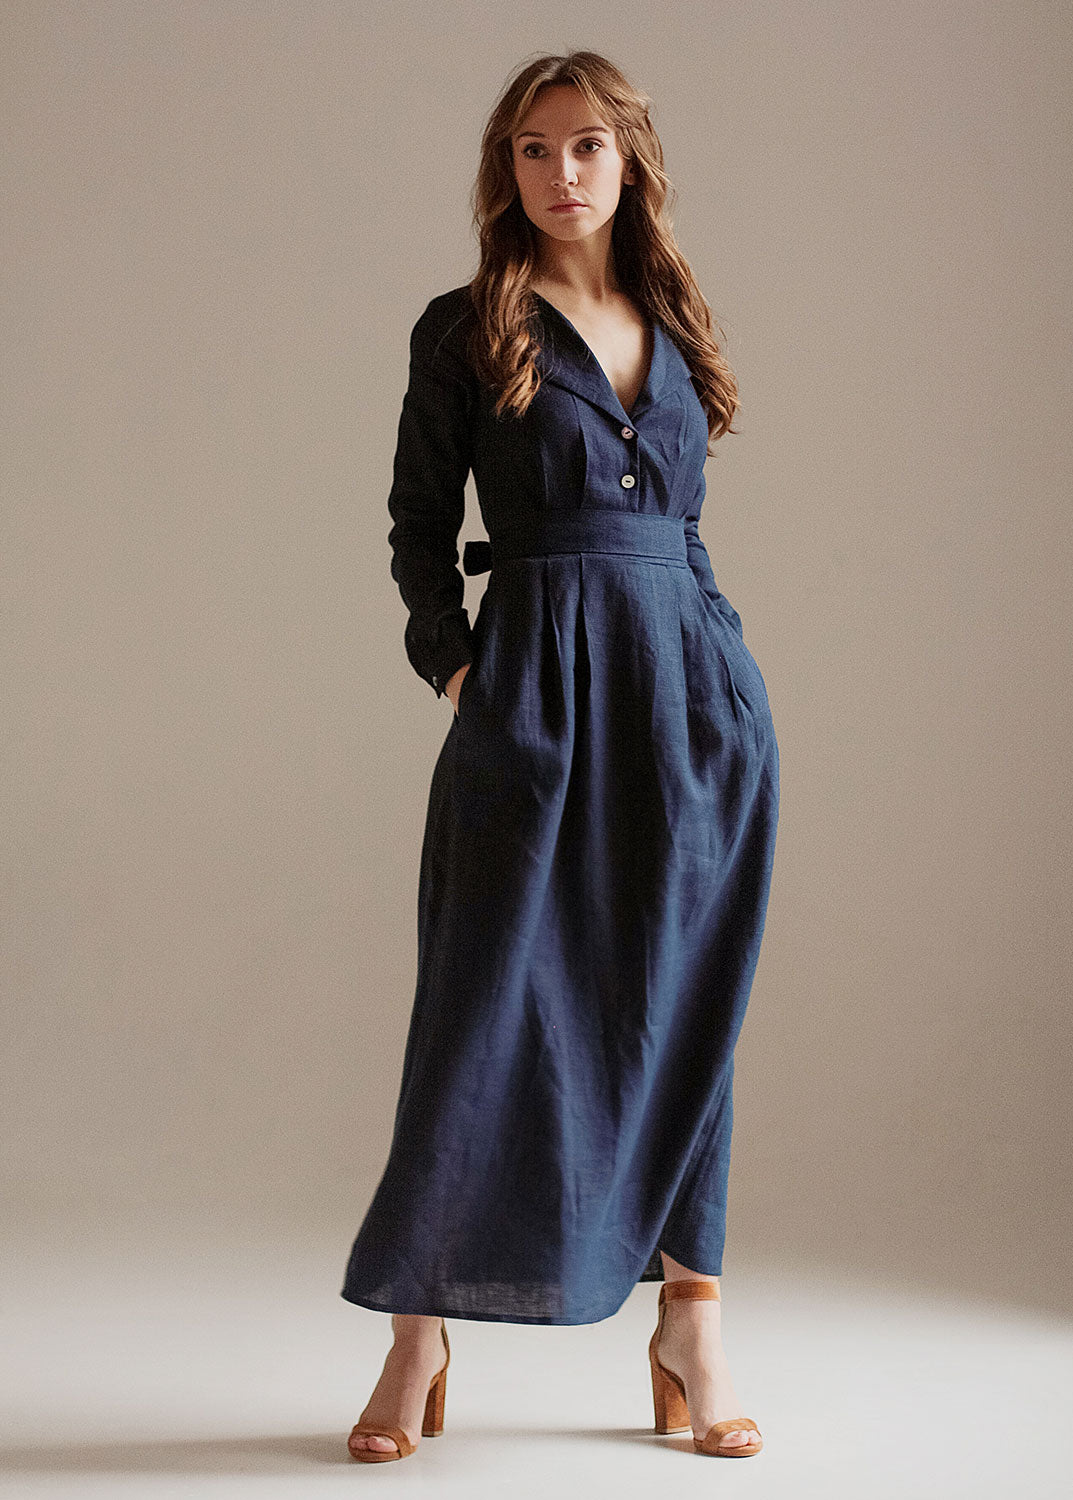 "Janet" Linen Navy Blue Maxi Dress with sleeves